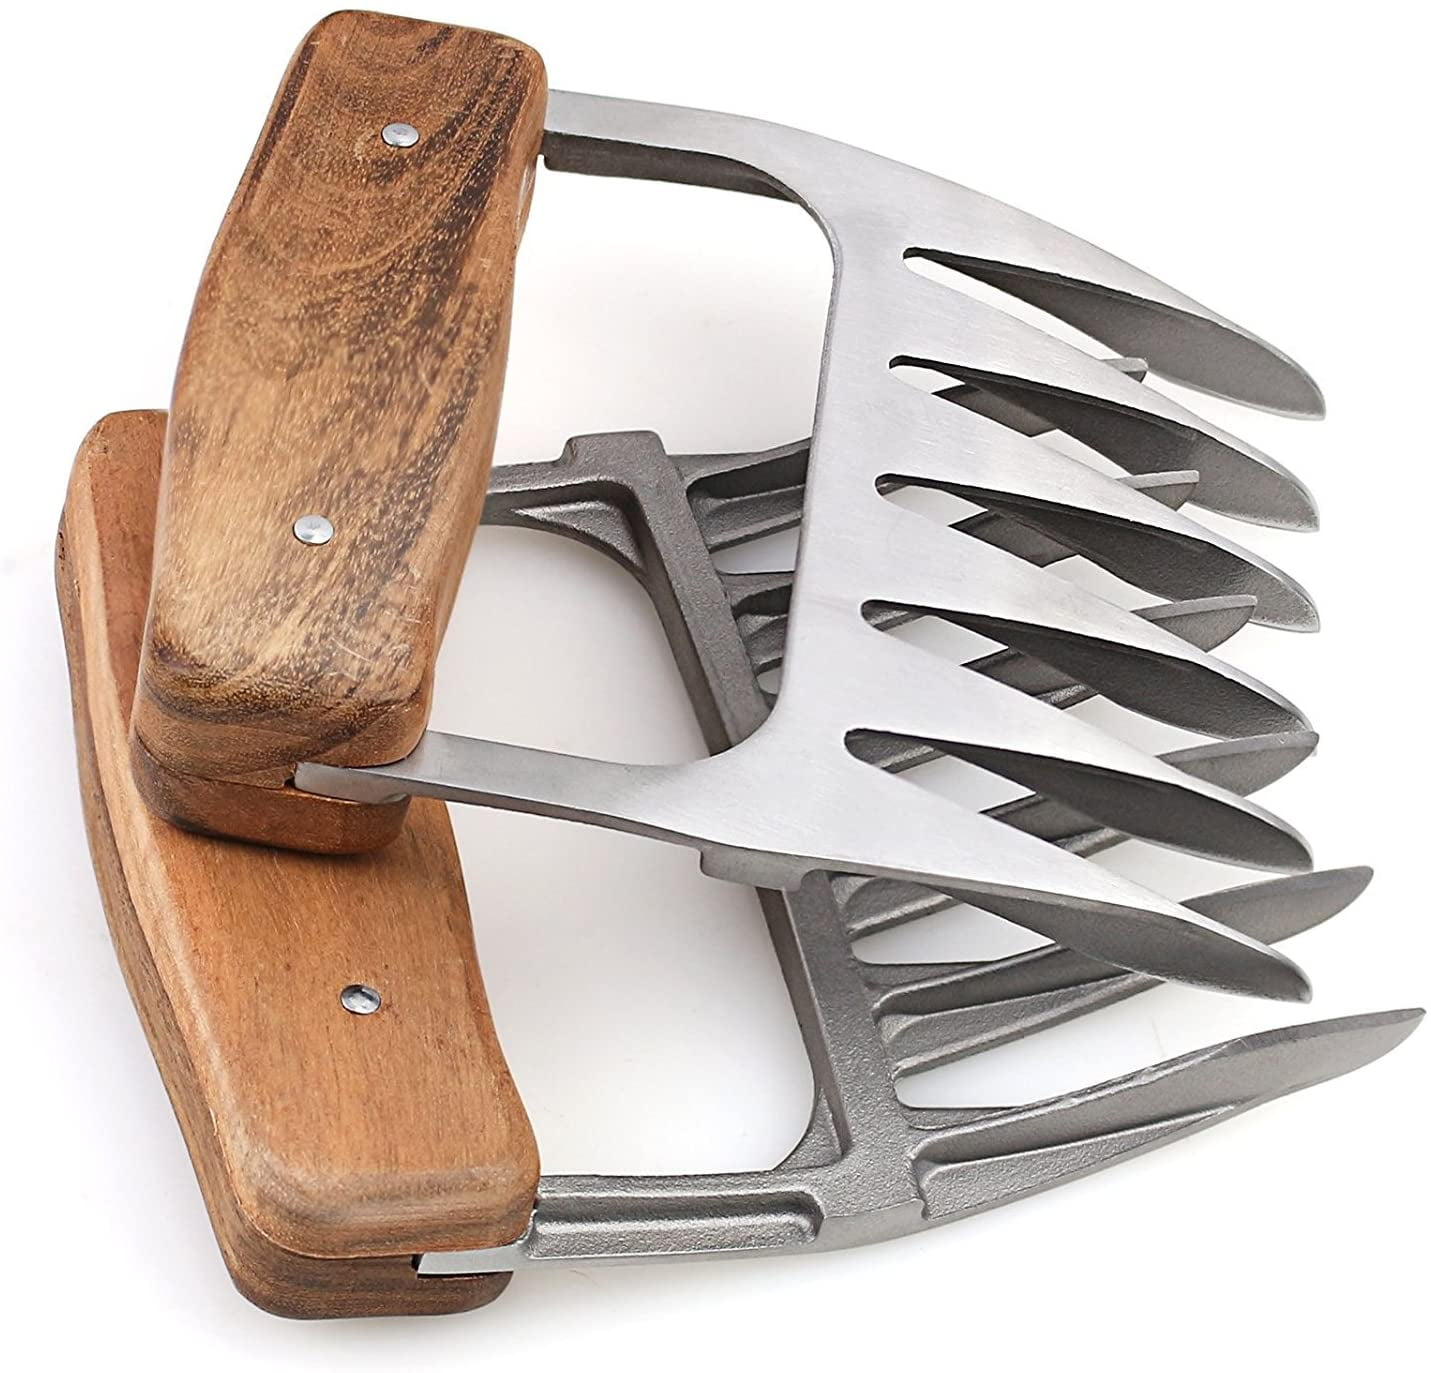 for Shredding 18/8 Stainless Steel Meat Forks with Wooden Handle Pulling Metal Bear Claw Meat Shredder Handing Lifting & Serving Pork Turkey & Chicken